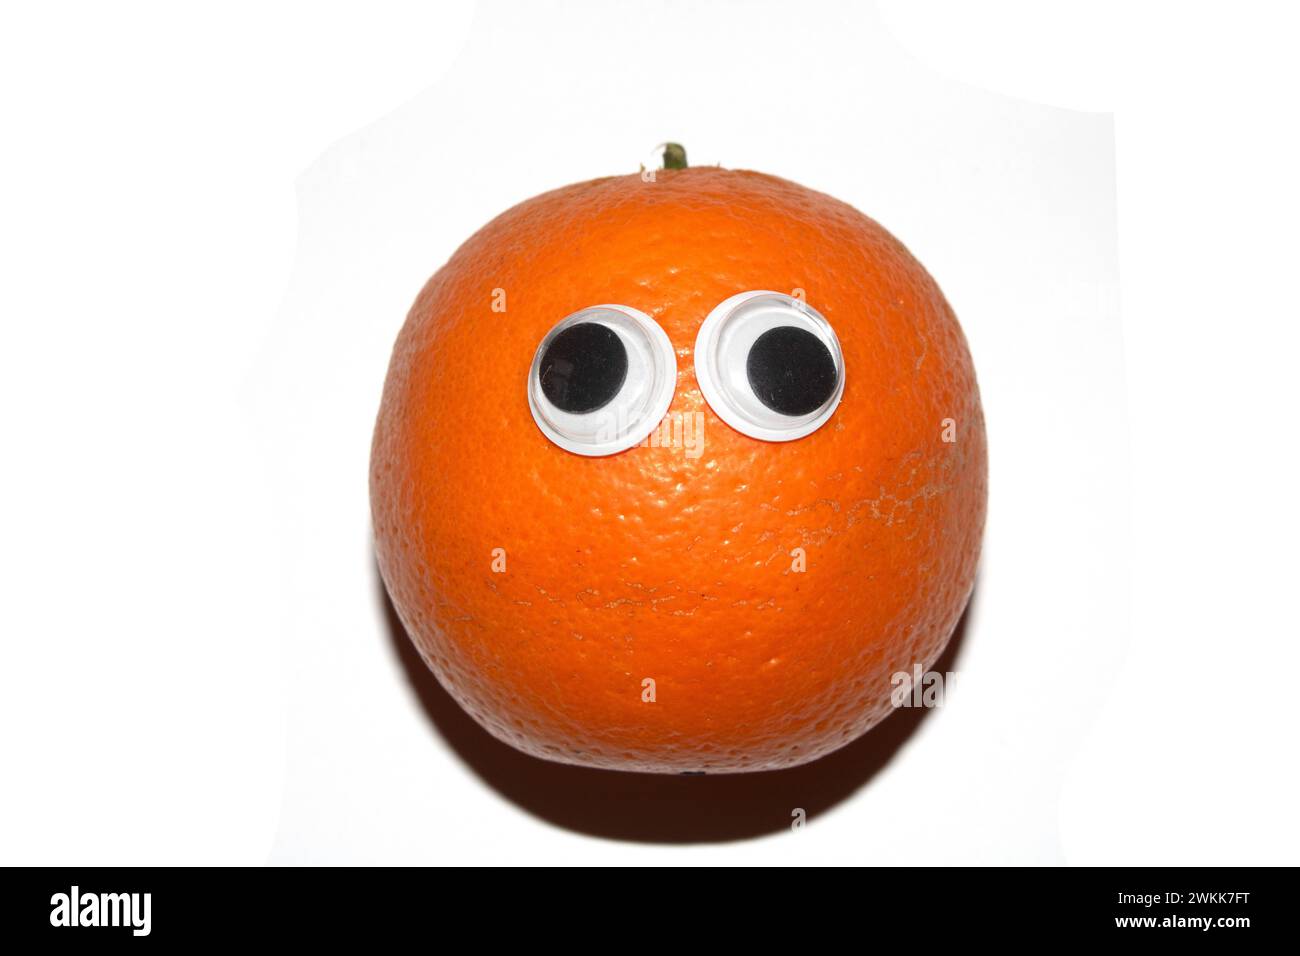 A Silly Food with Goggly Wobbly Eyes on them Stock Photo